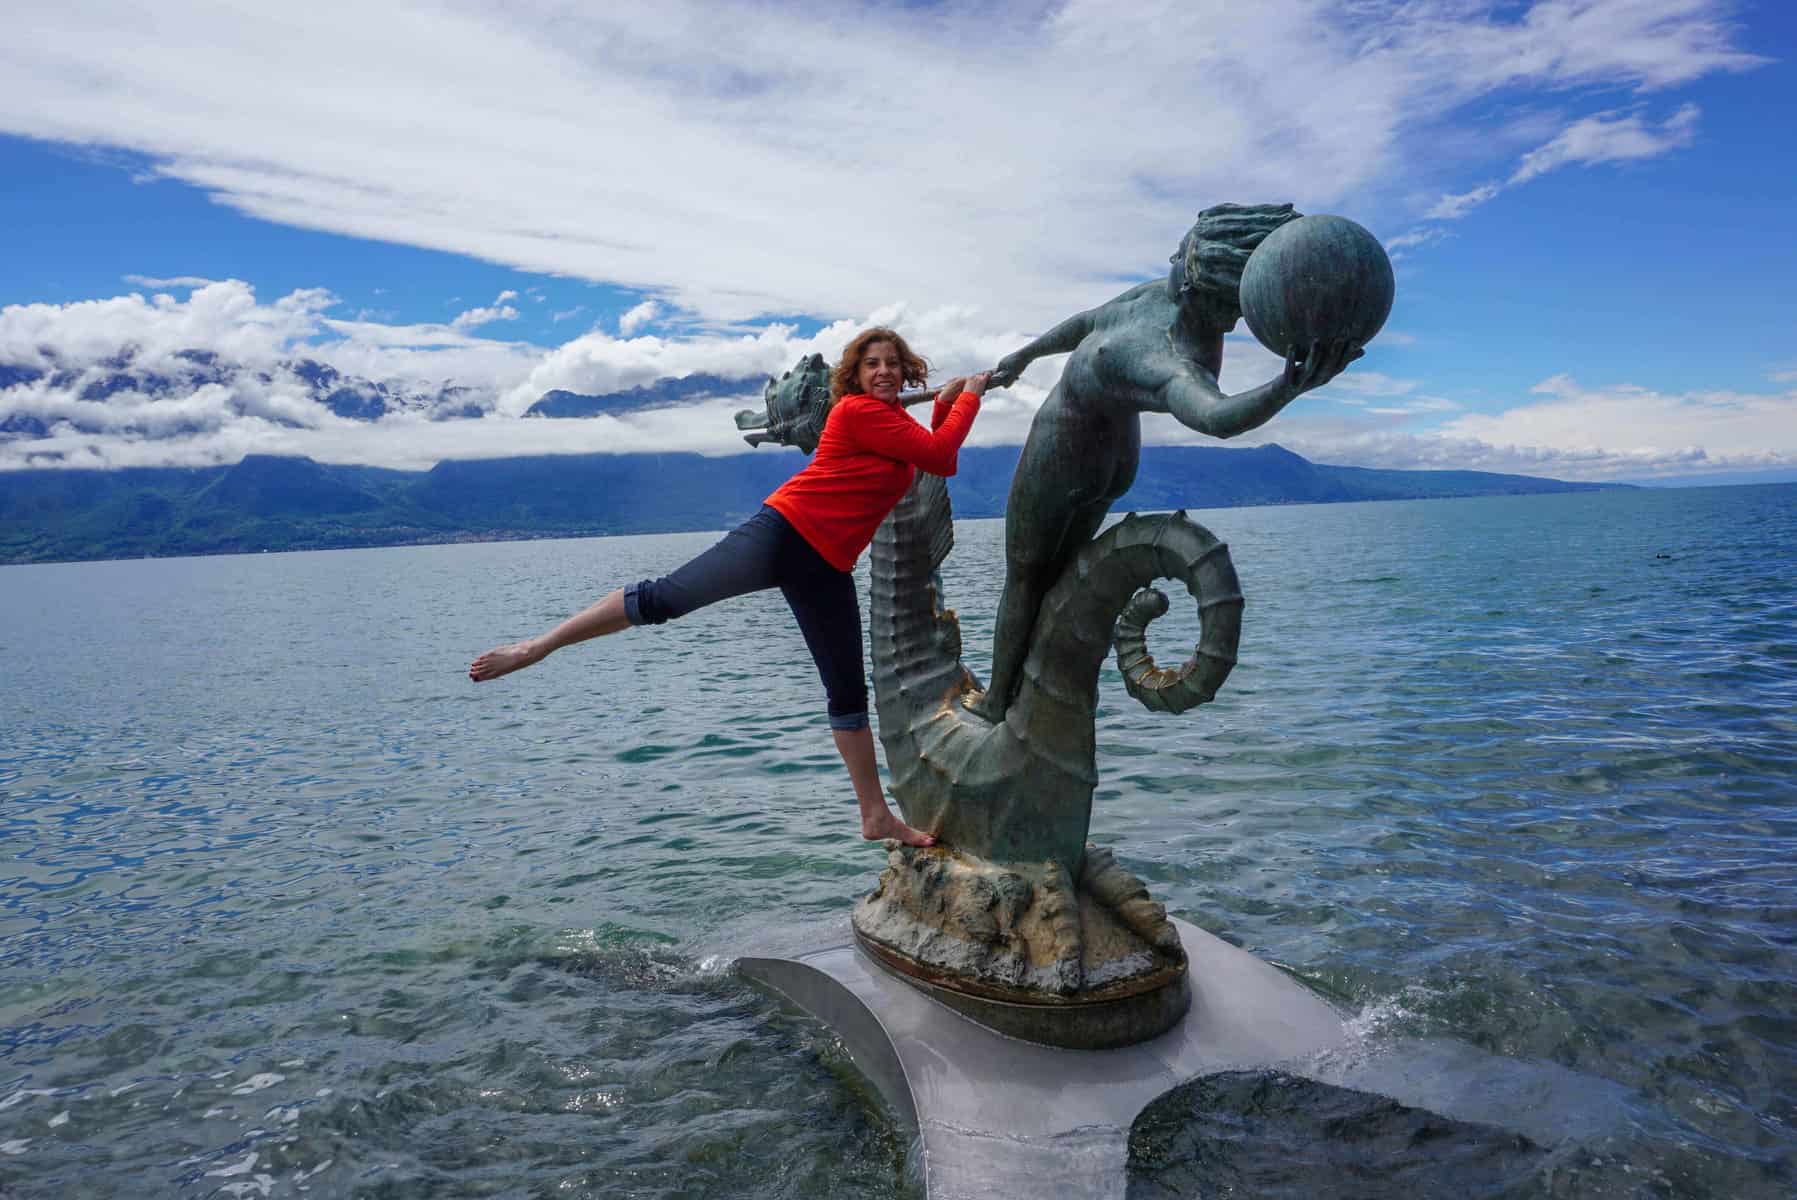 W woman in jeans and red top hanging off a sculpture on a lake